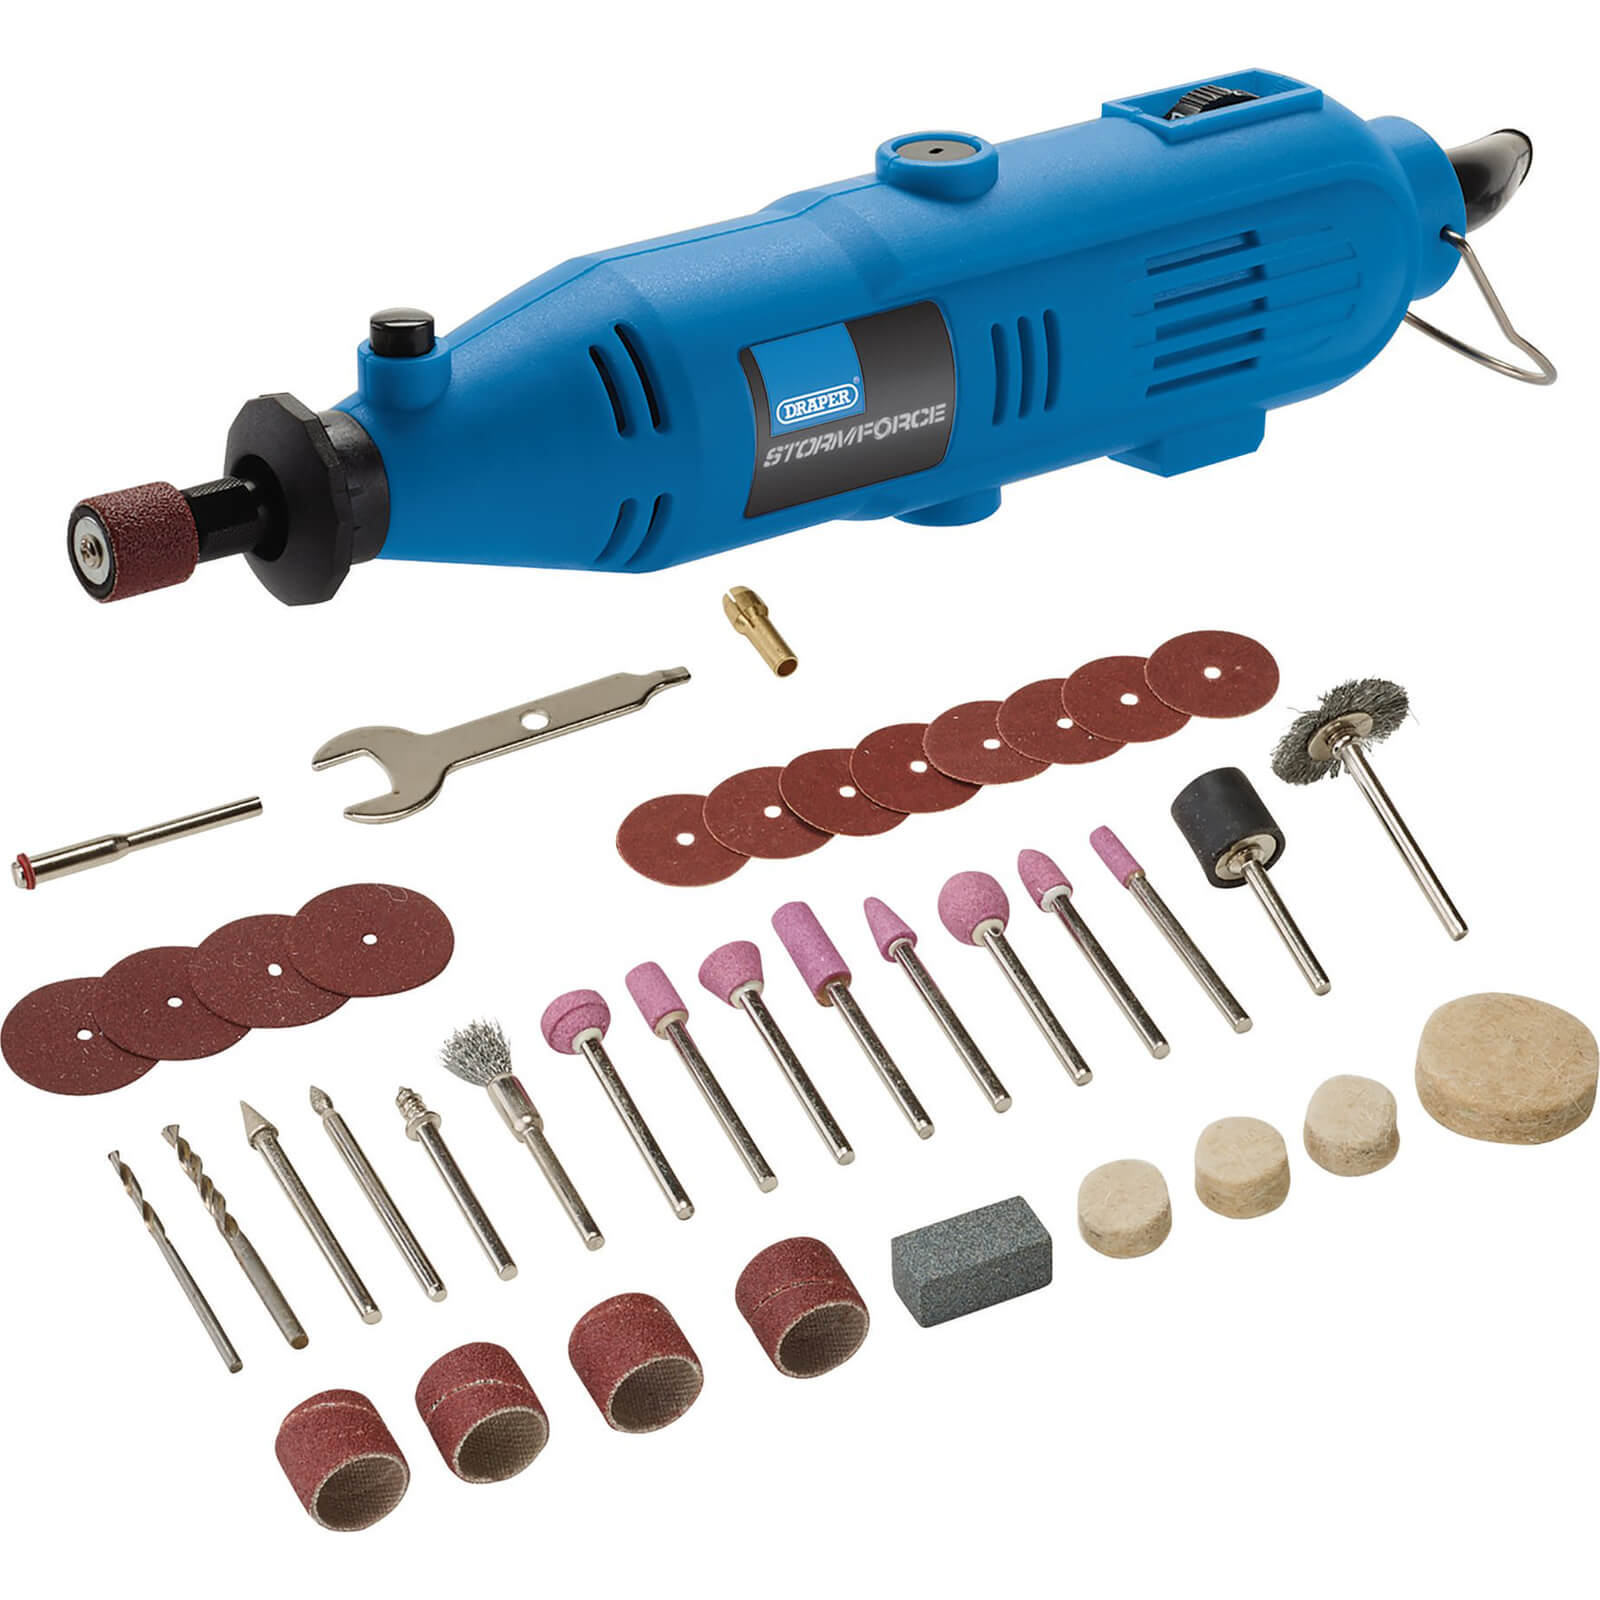 Image of Draper MT135SF40 Rotary Multi Tool and 40 Piece Accessory Kit 240v